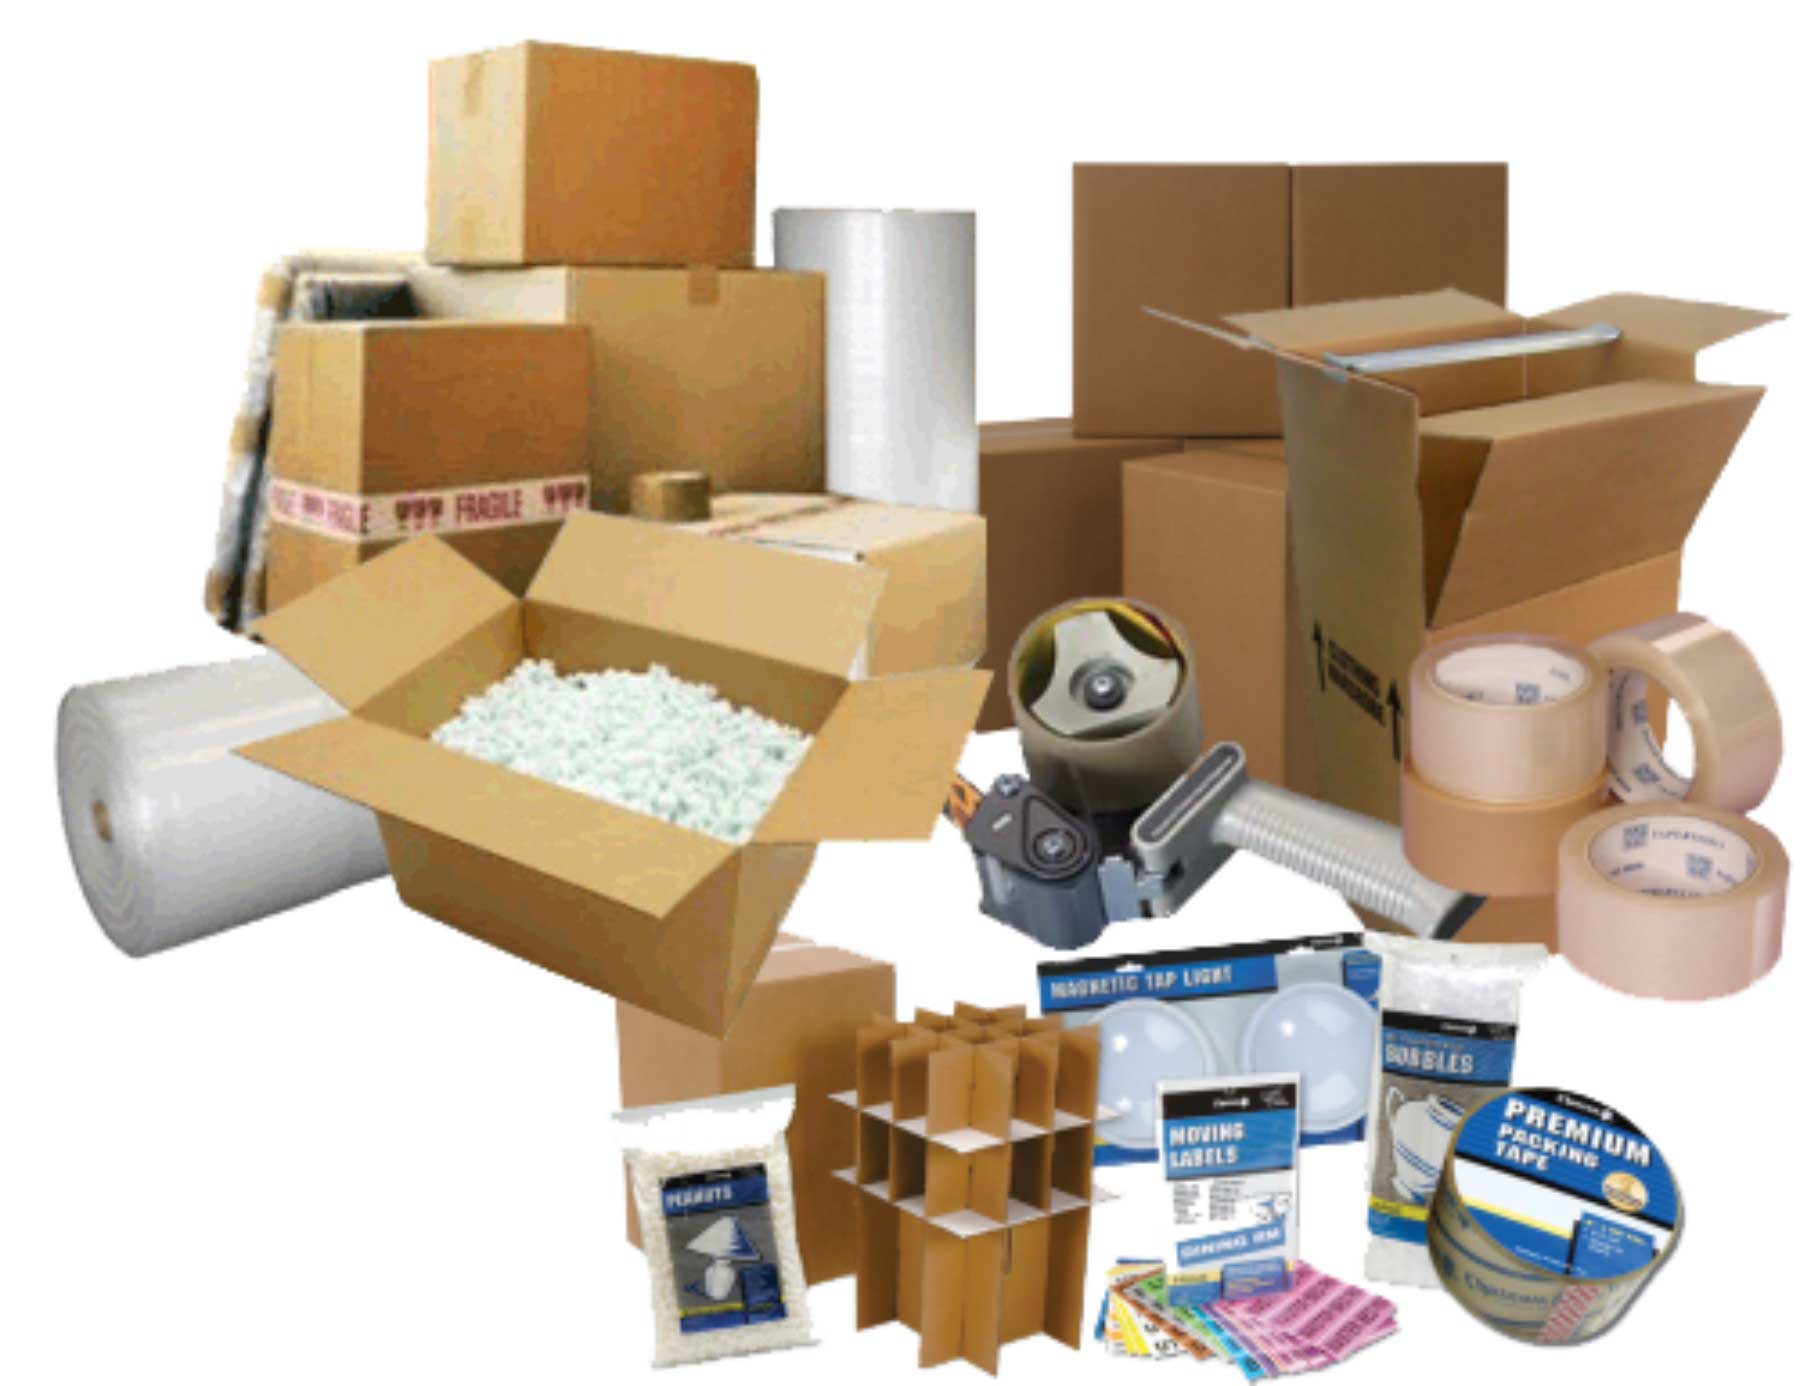 packers and movers India